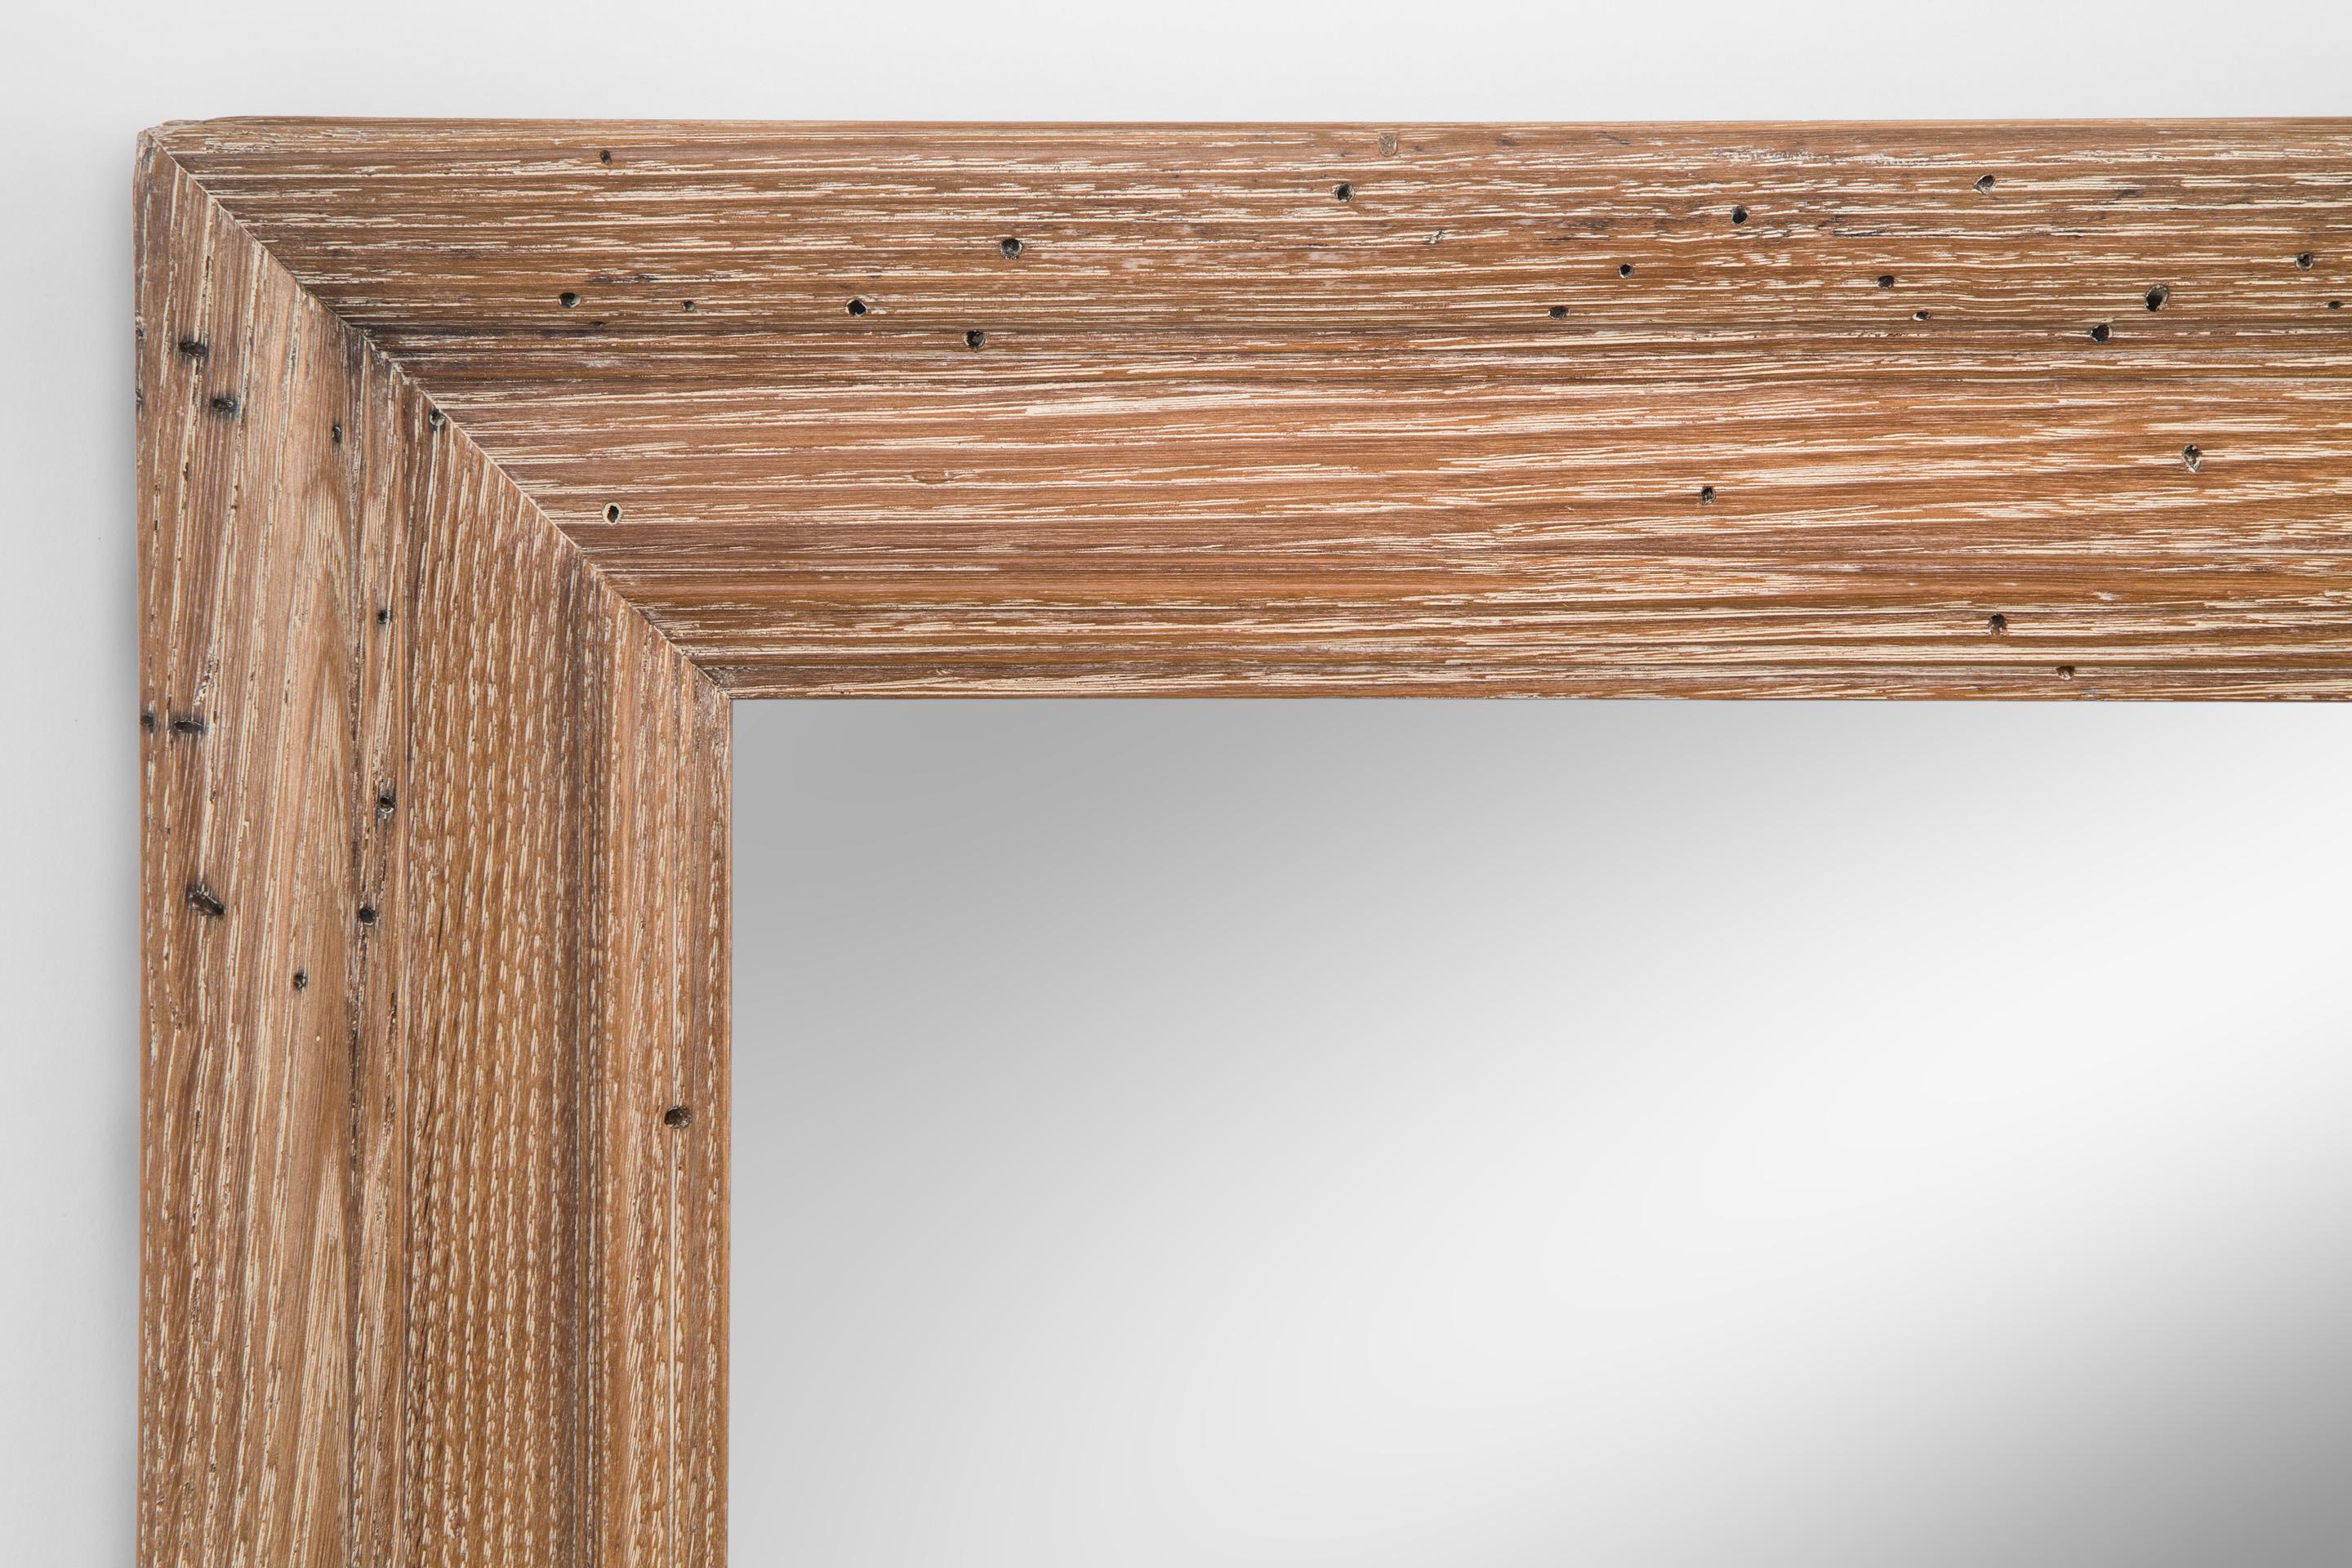 Limed oak framed mirror
19th century
An example of how simplicity is often the best solution; this handsome mirror would grace any interior. The rectangular mirror within a molded limed oak frame.